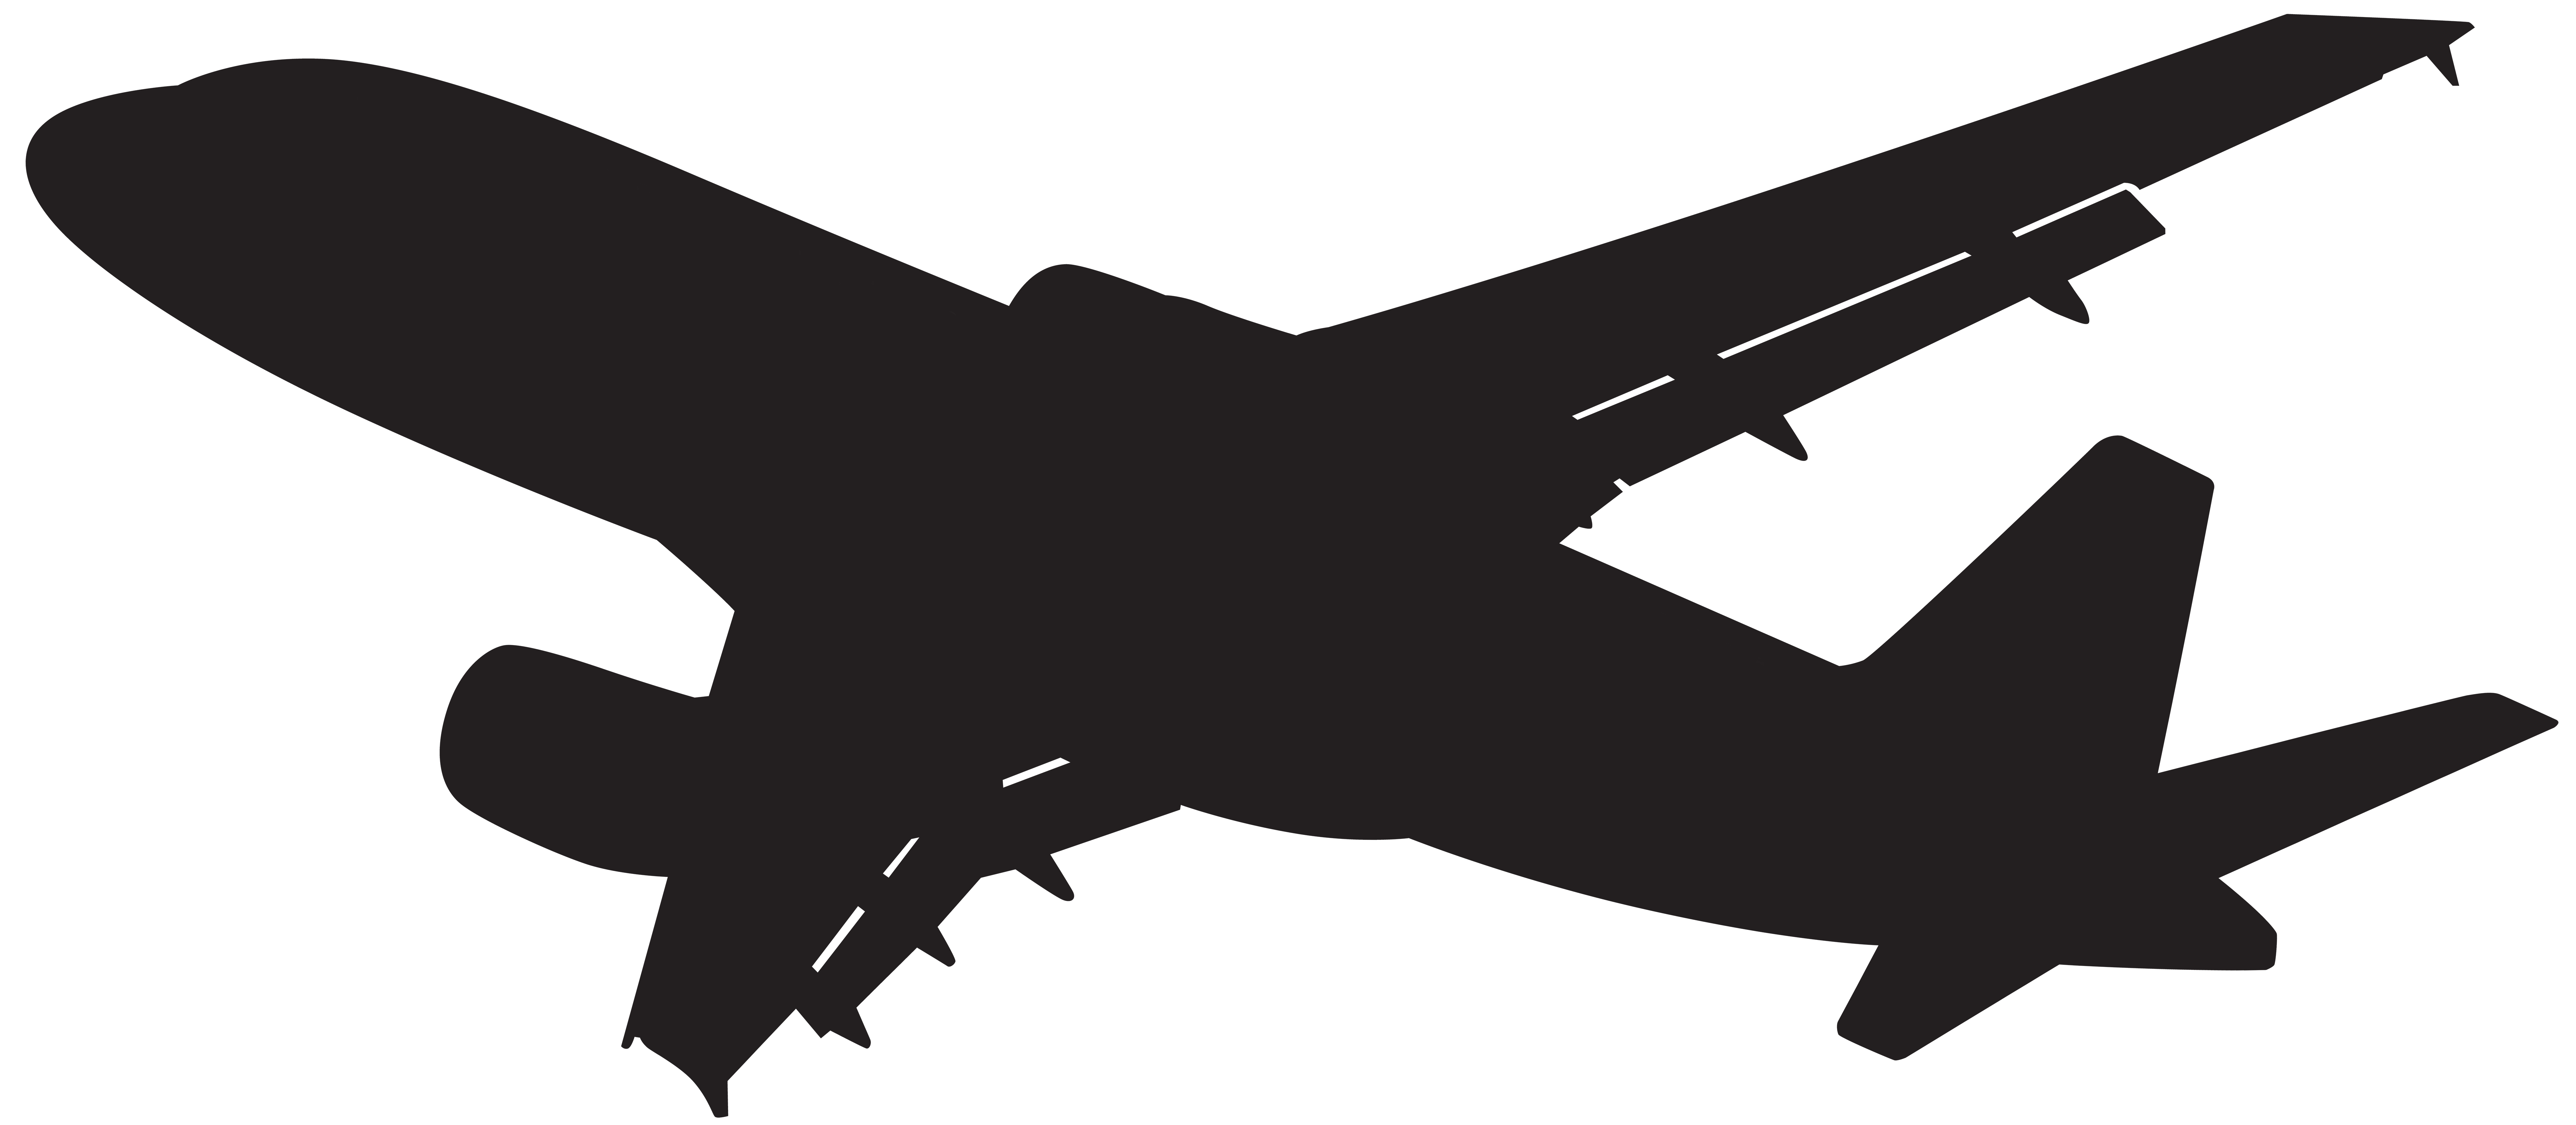 Plane silhouette png.